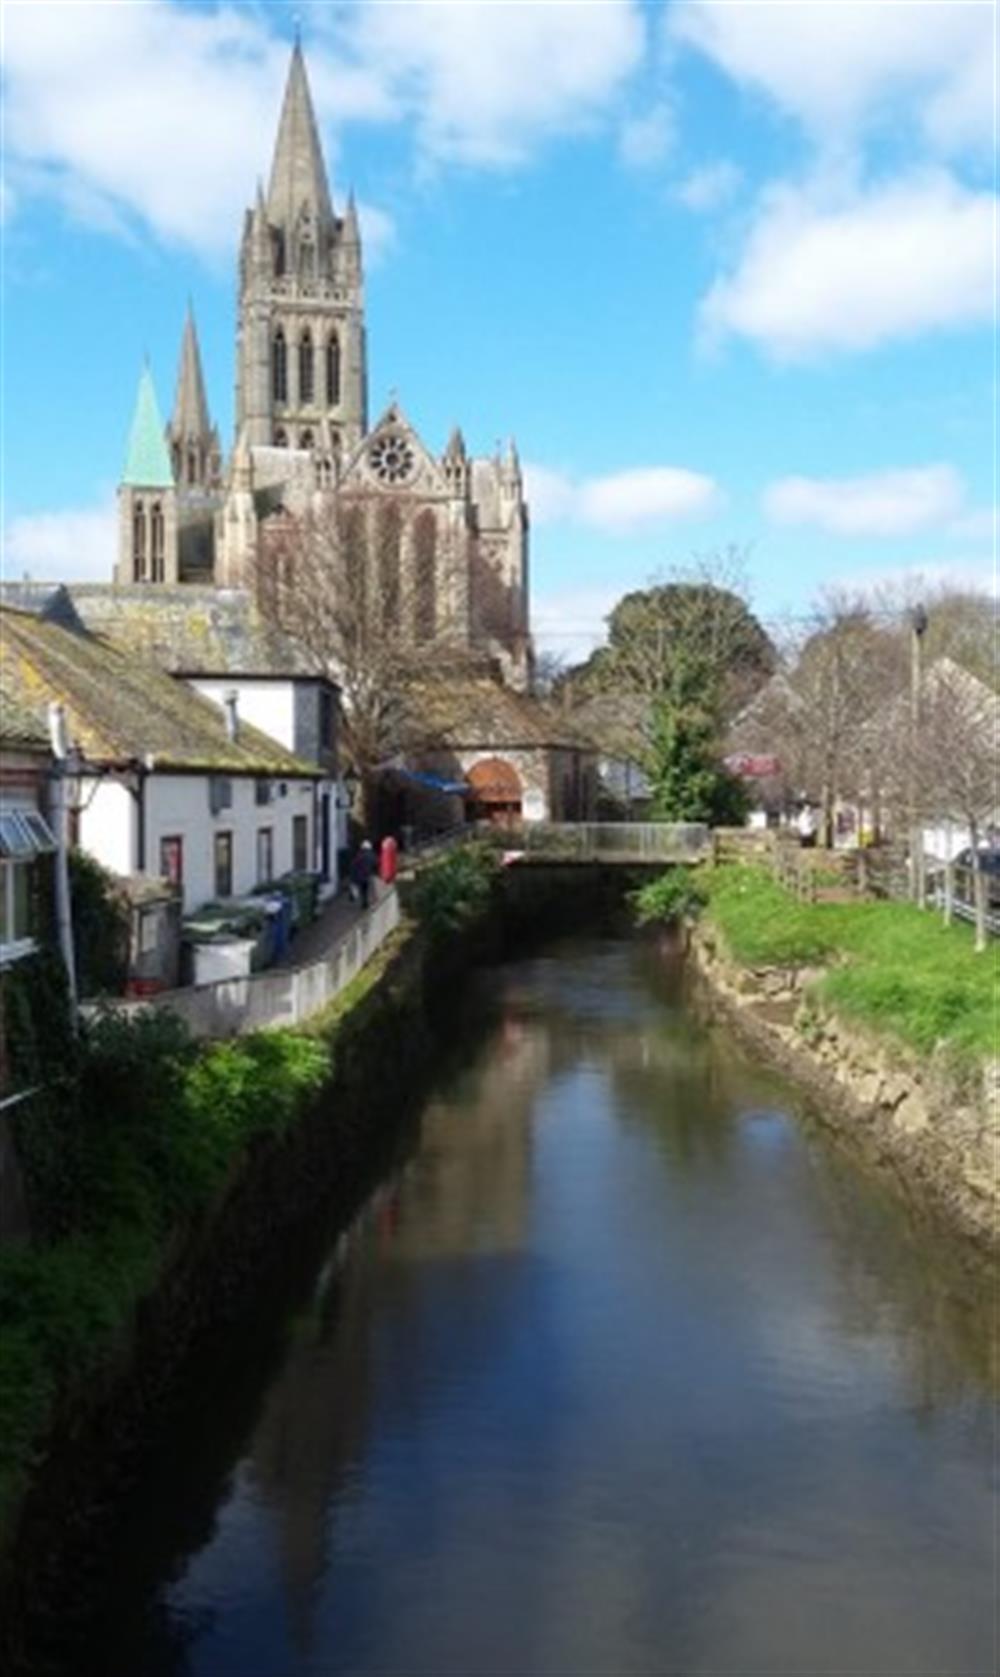 Truro is our main shopping centre, perfect for all shops, cafes and restaurants.